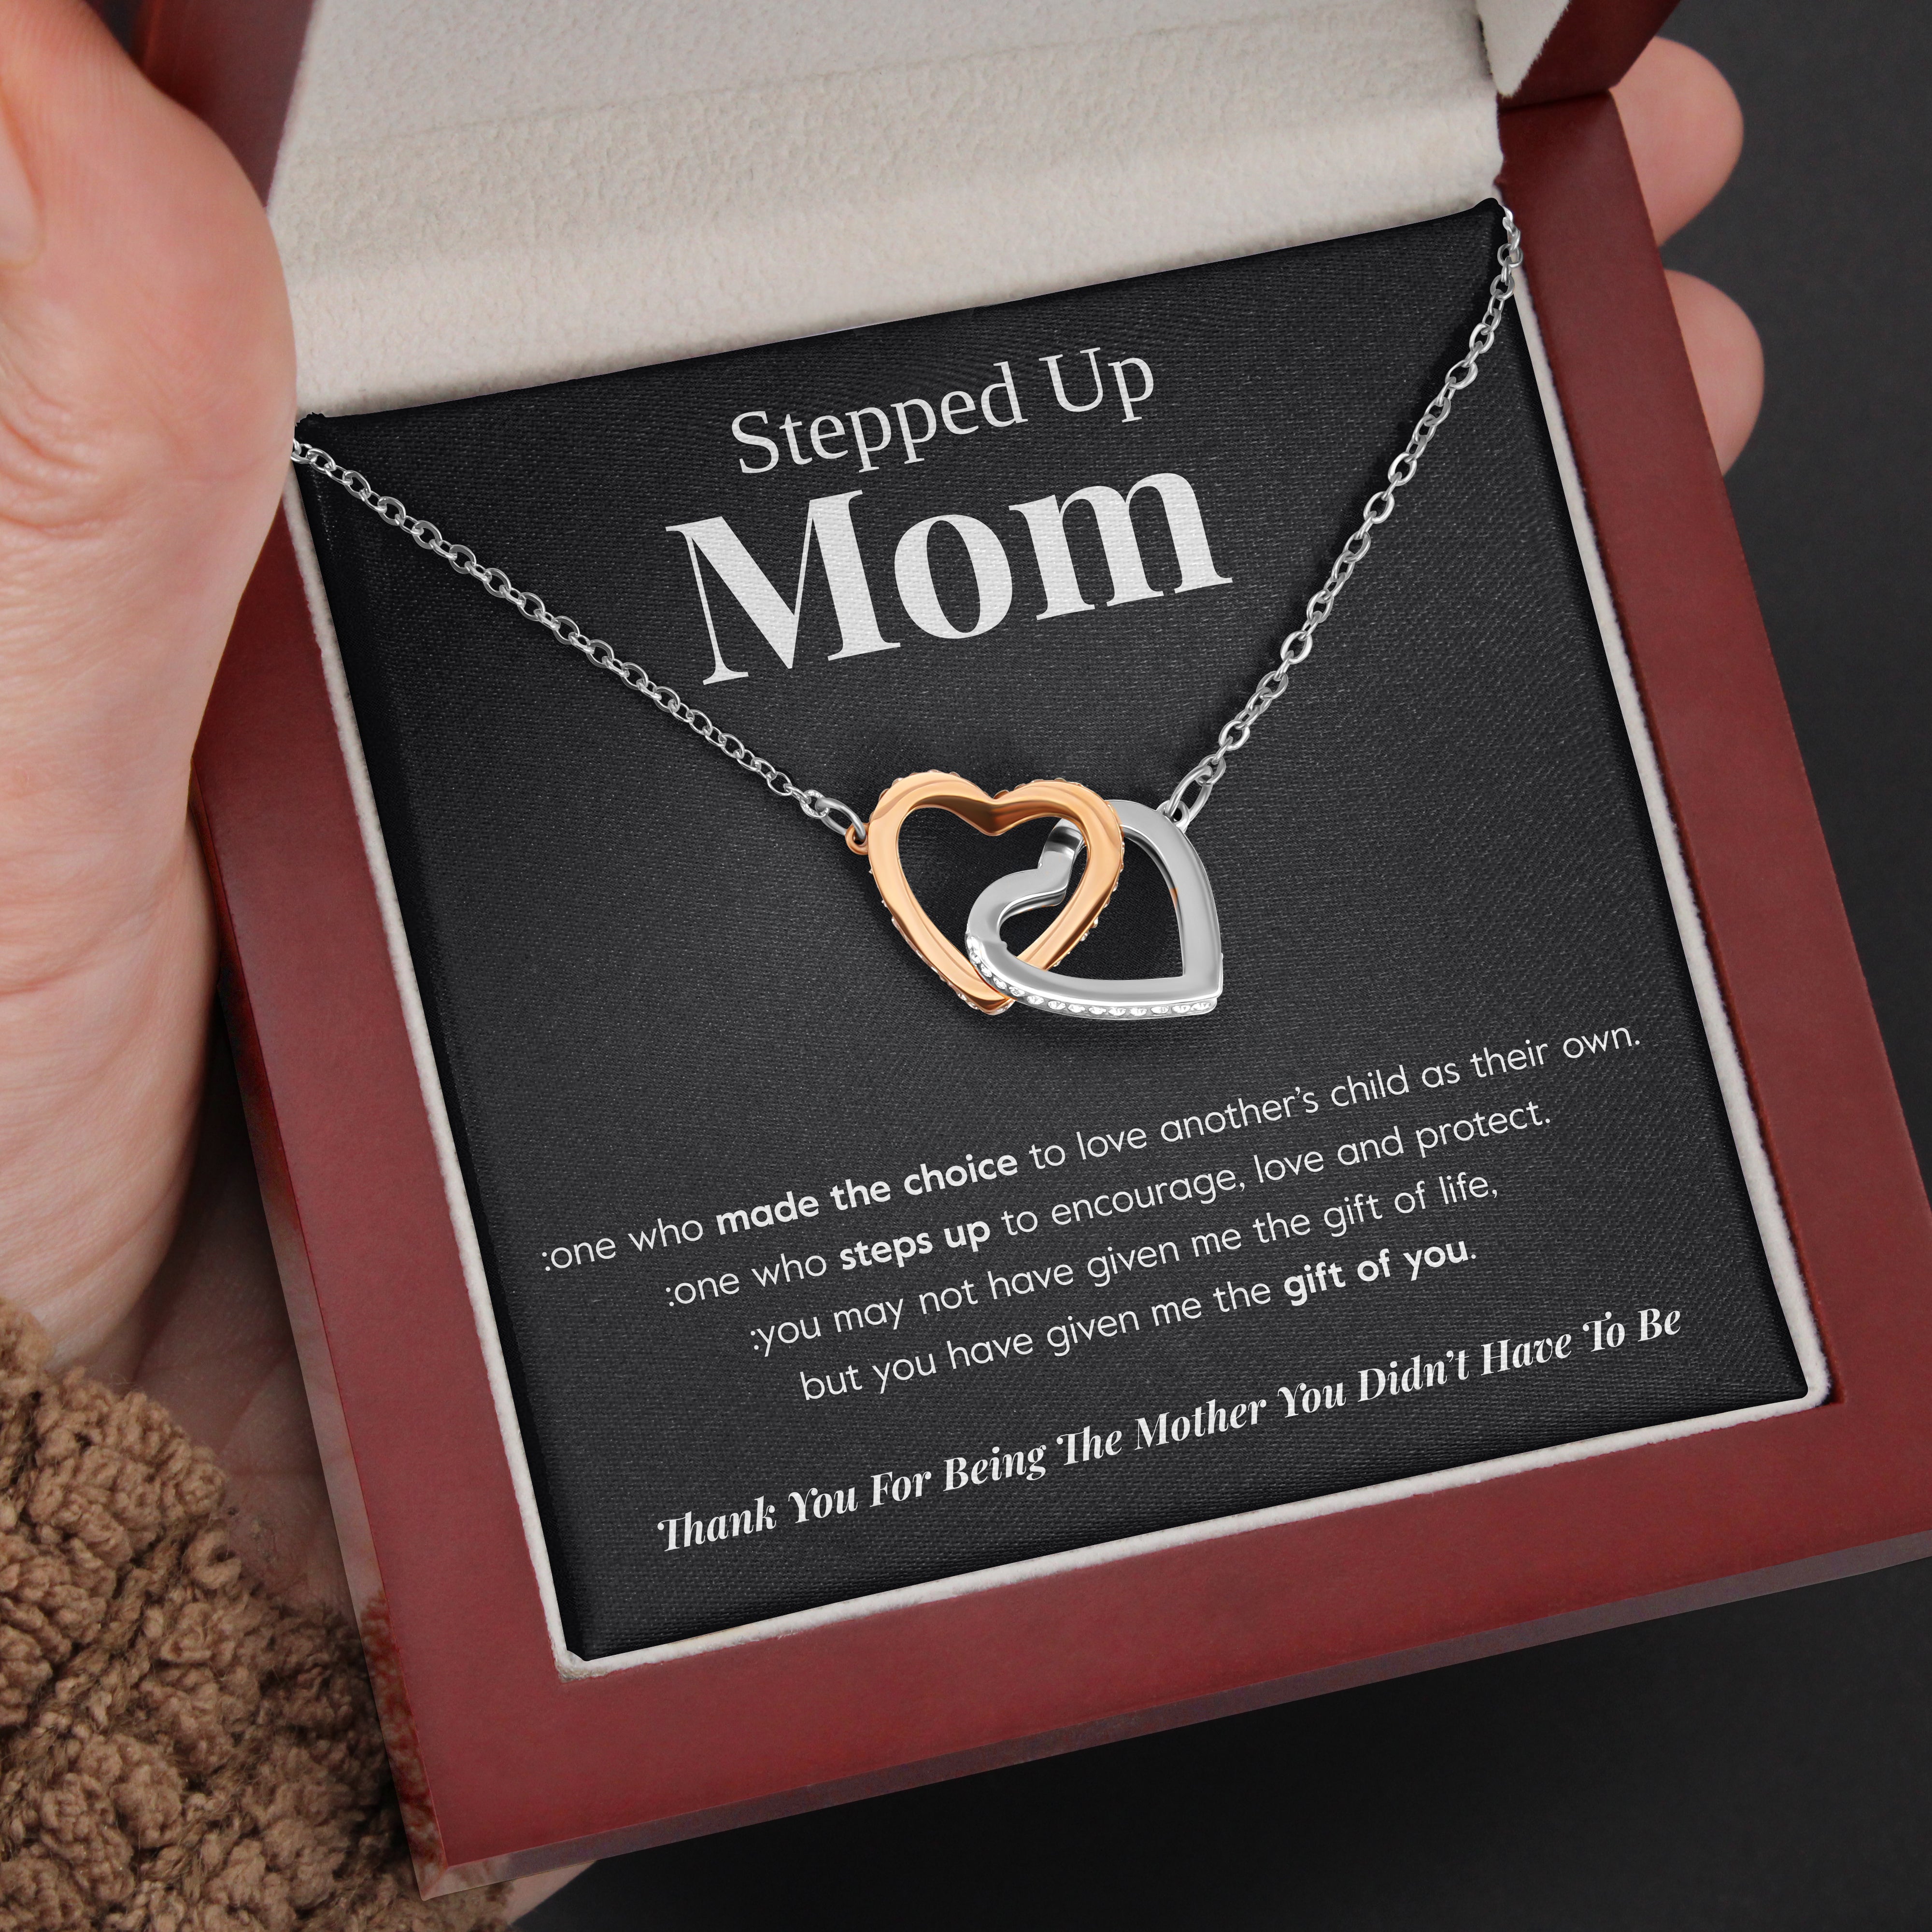 To My Step Mom | "Gift of You" | Interlocking Hearts Necklace